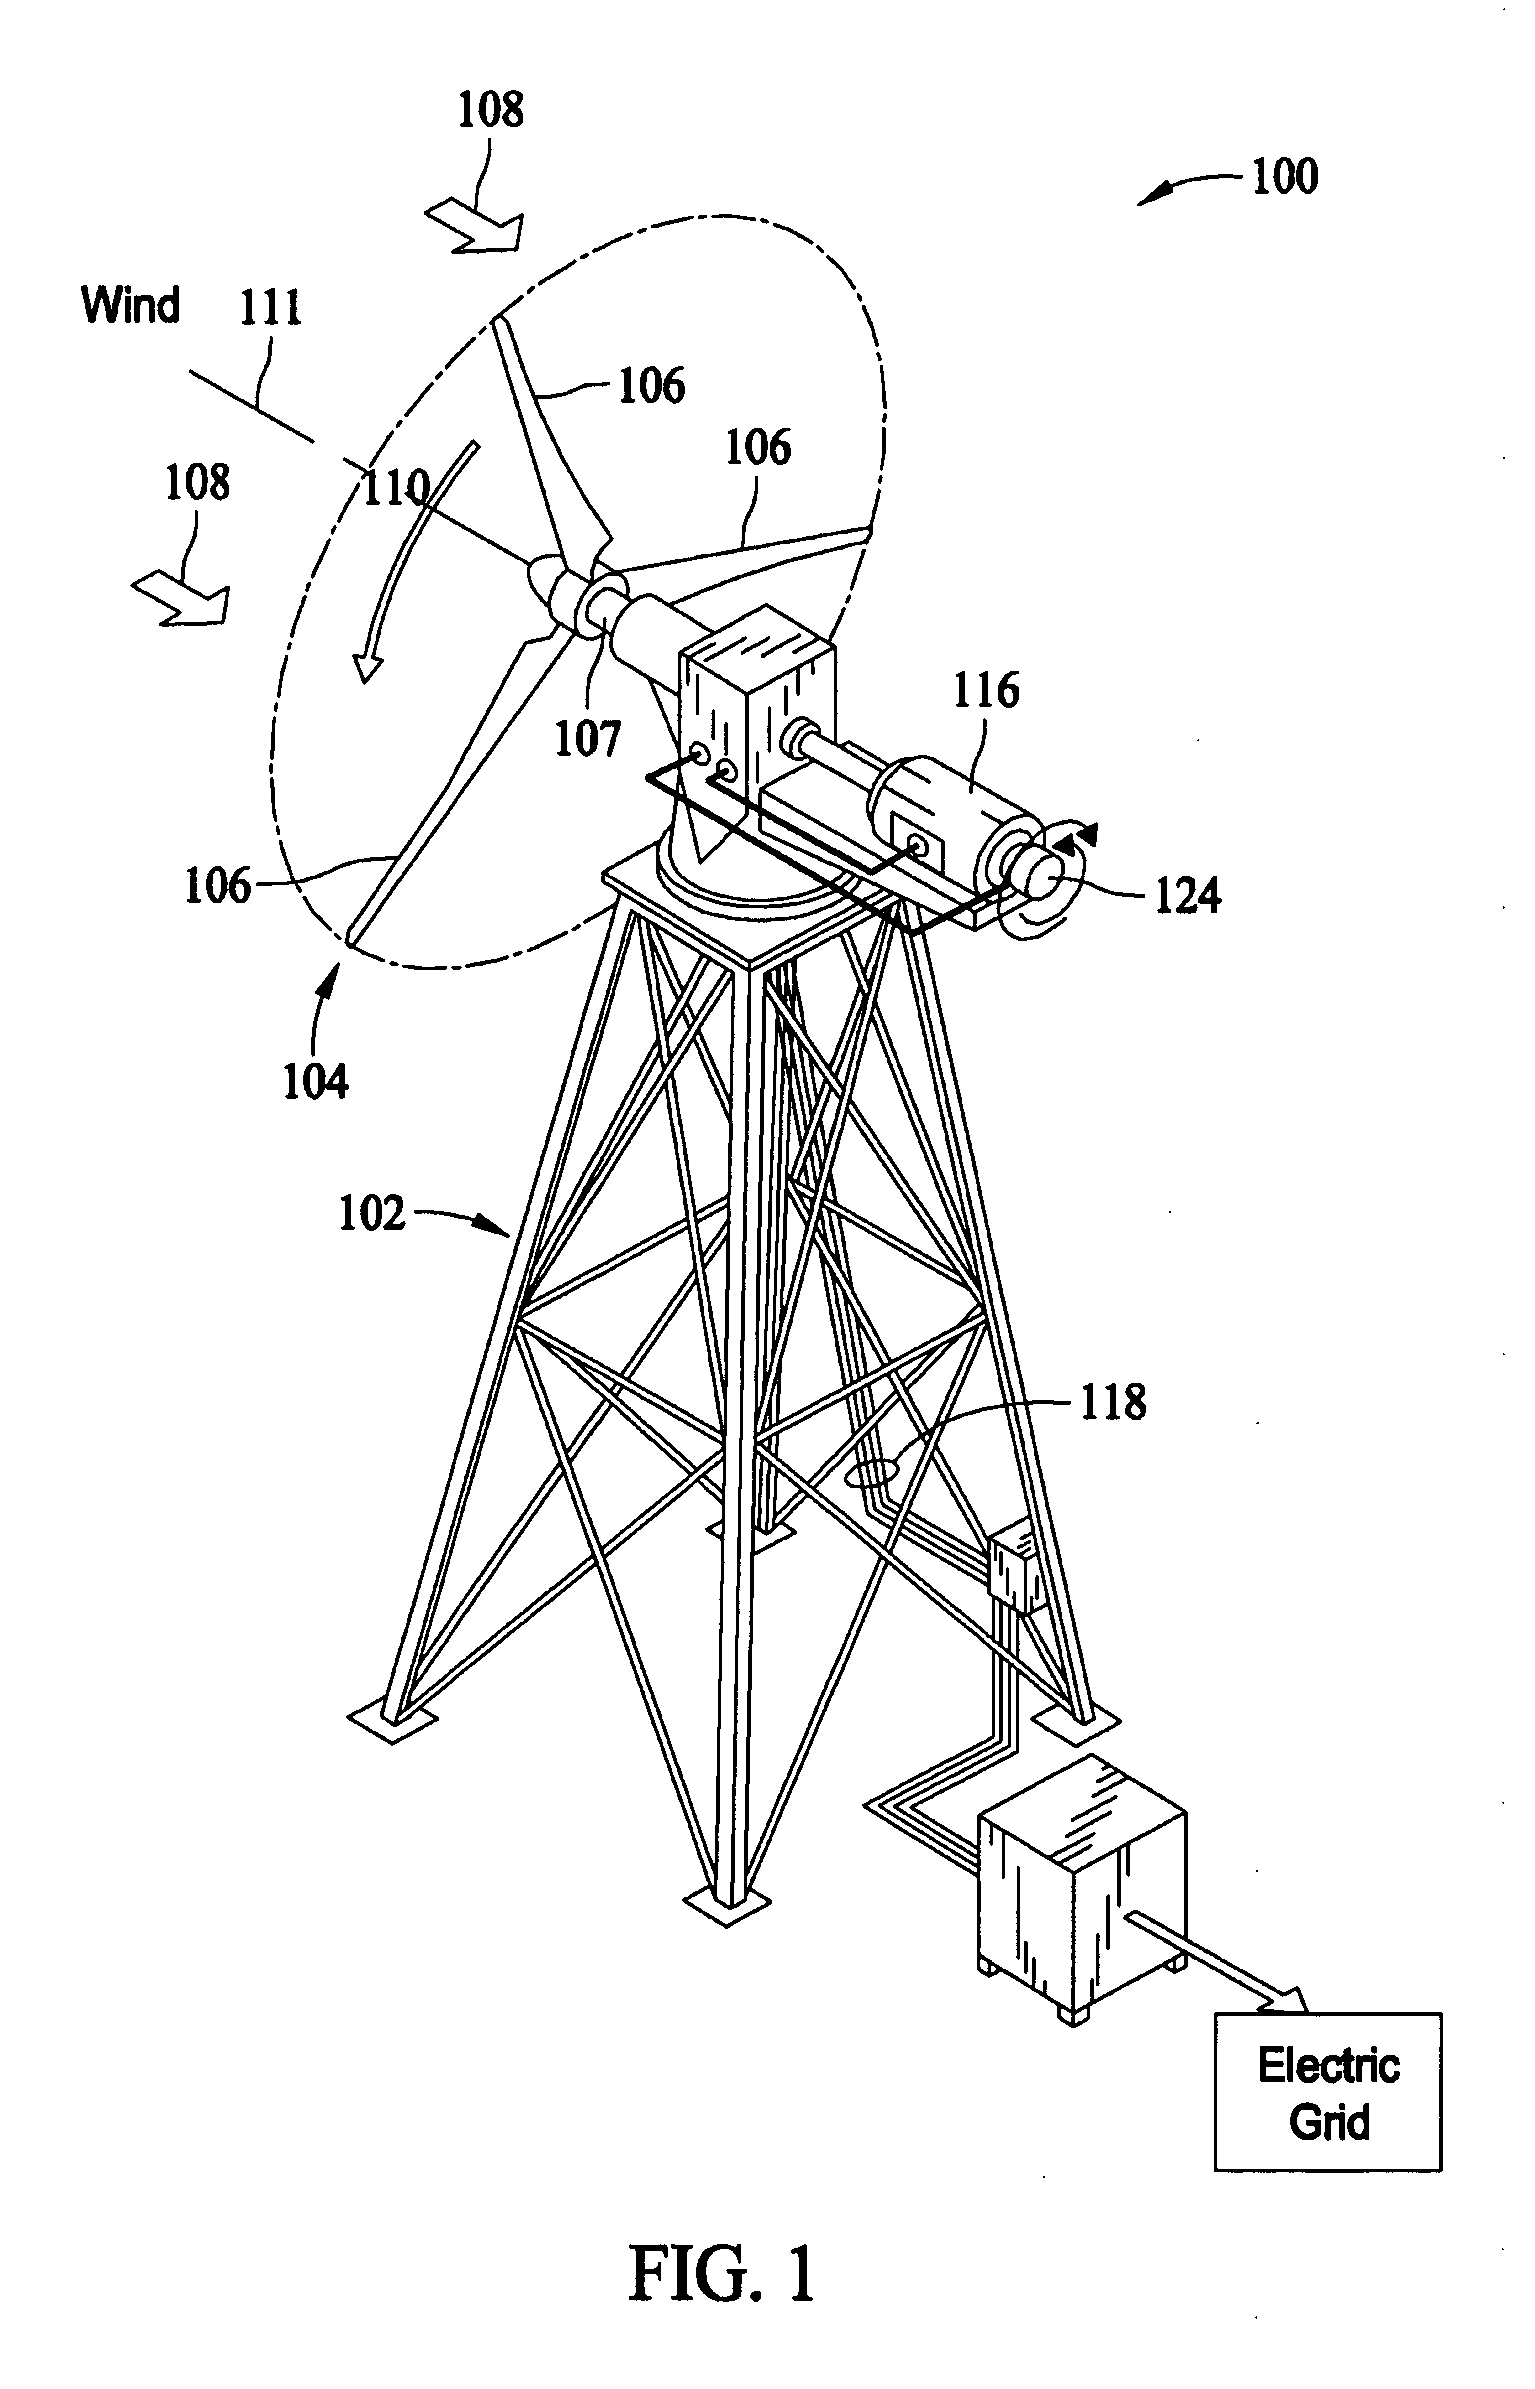 Wind turbine rotor assembly and blade having acoustic flap